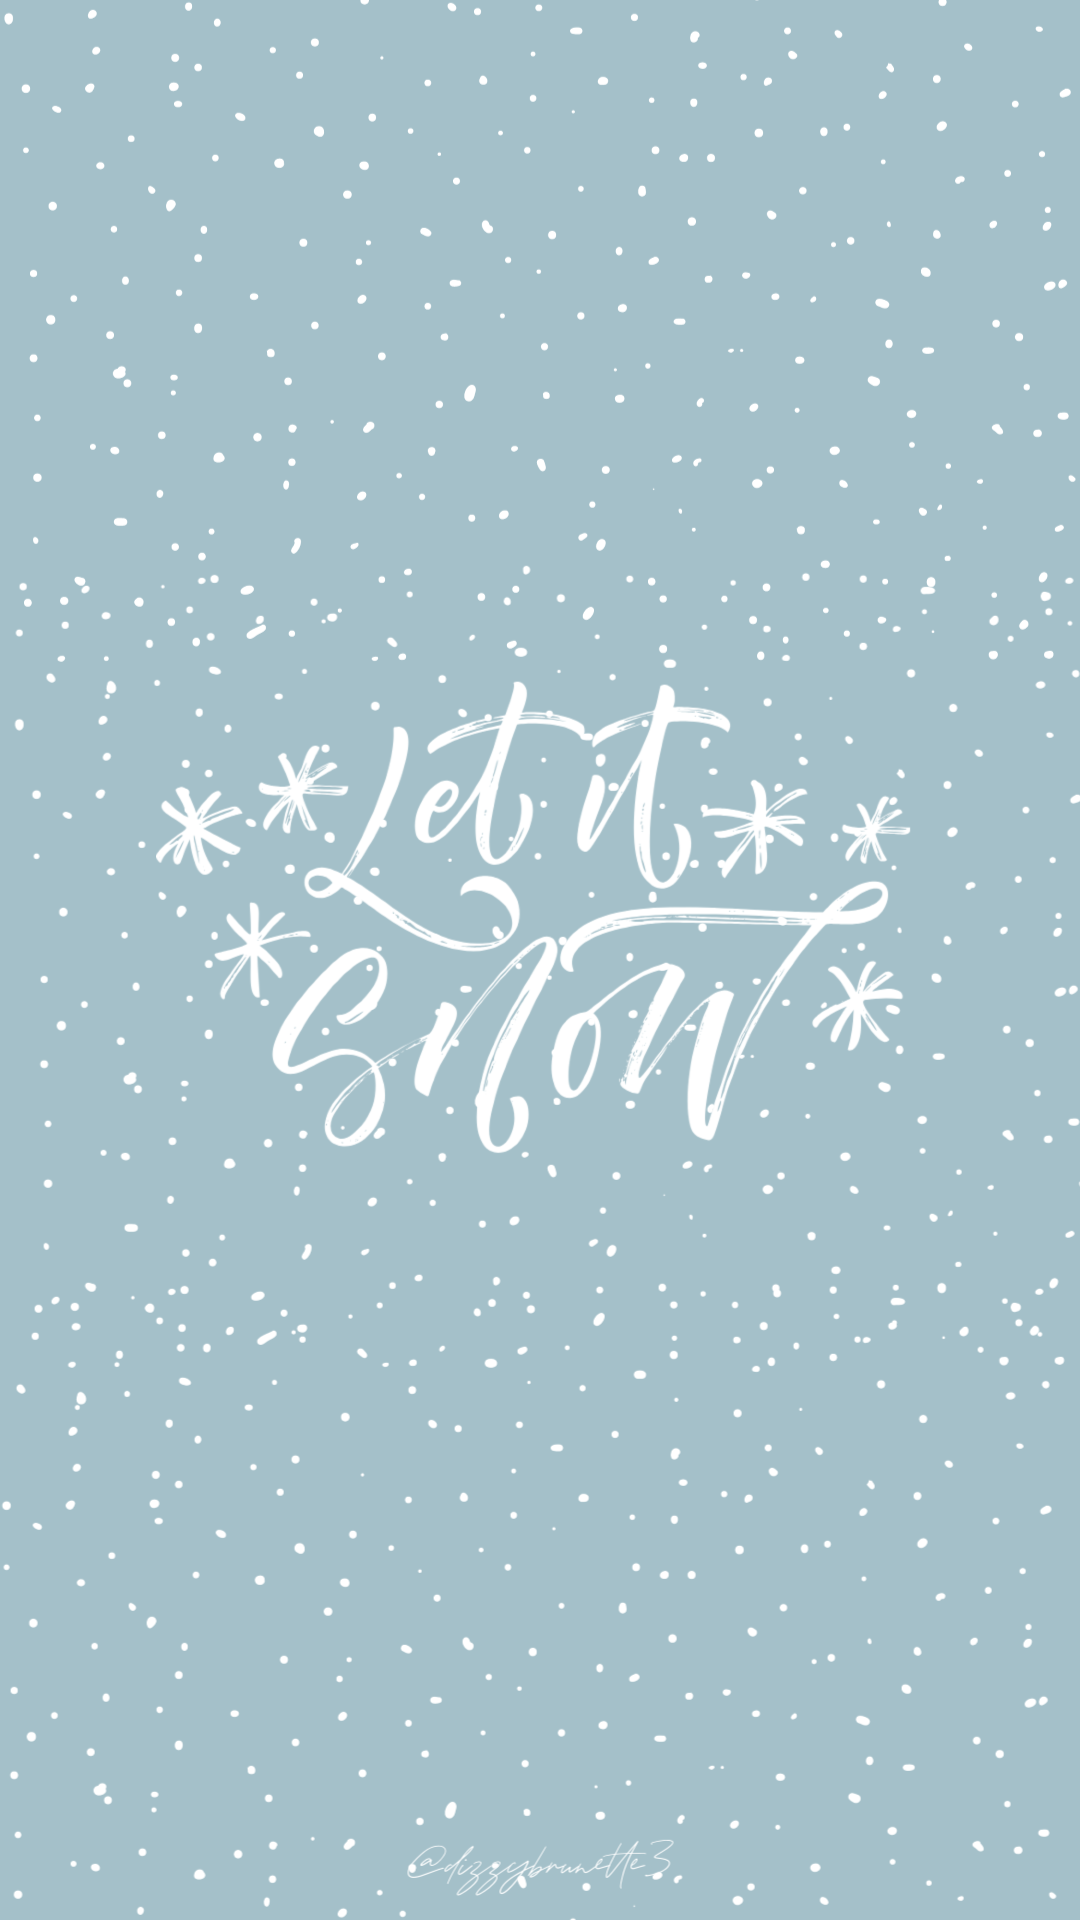 quotes Free Christmas Phone Wallpaper #phonebackground Free Christmas Phone. Christmas phone wallpaper, Wallpaper iphone christmas, Christmas phone background